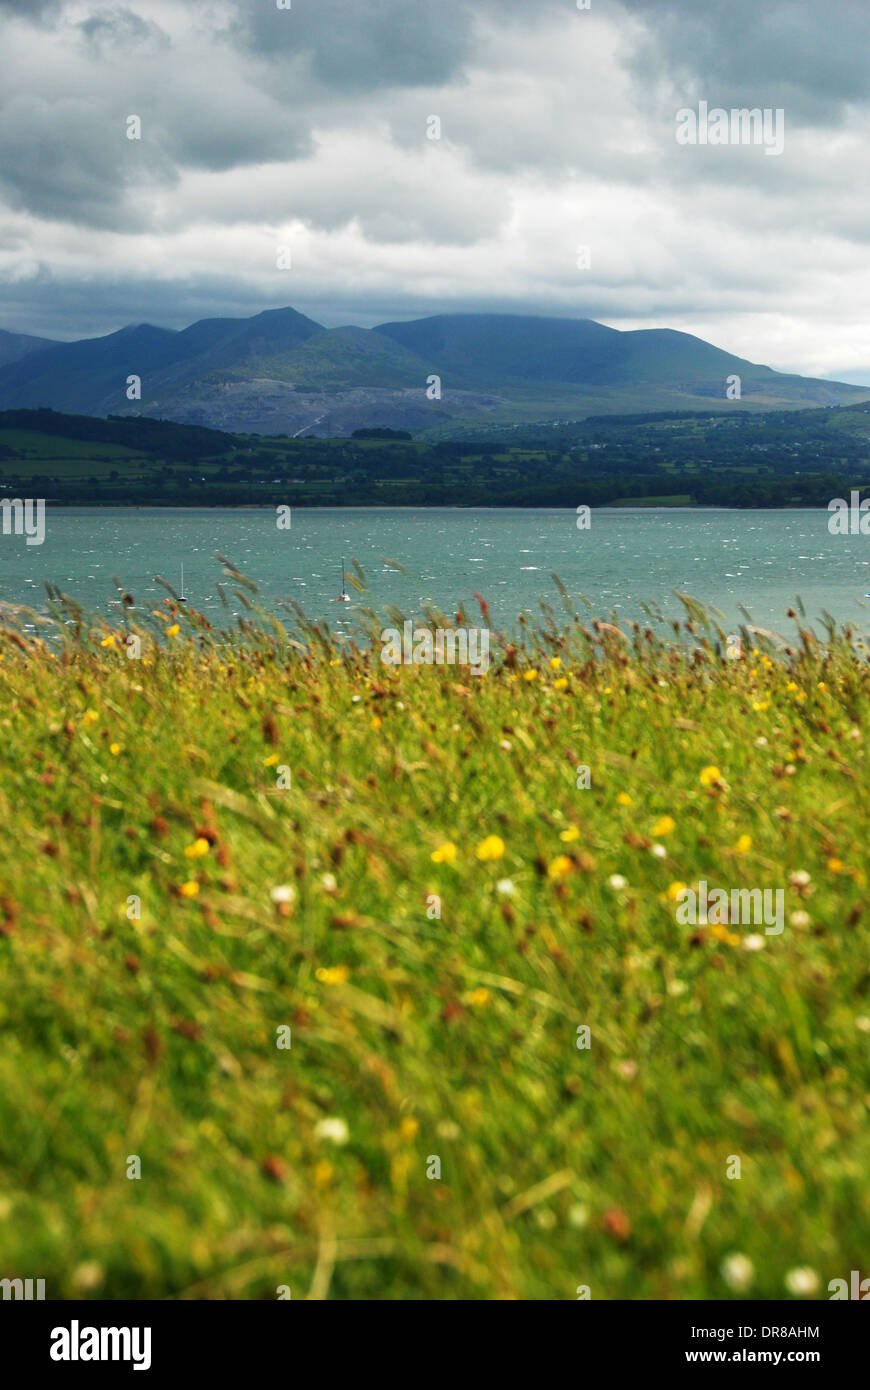 View of the Snowdon Mountain Range across the Straits of Menai, with Anglesey in the foreground Stock Photo